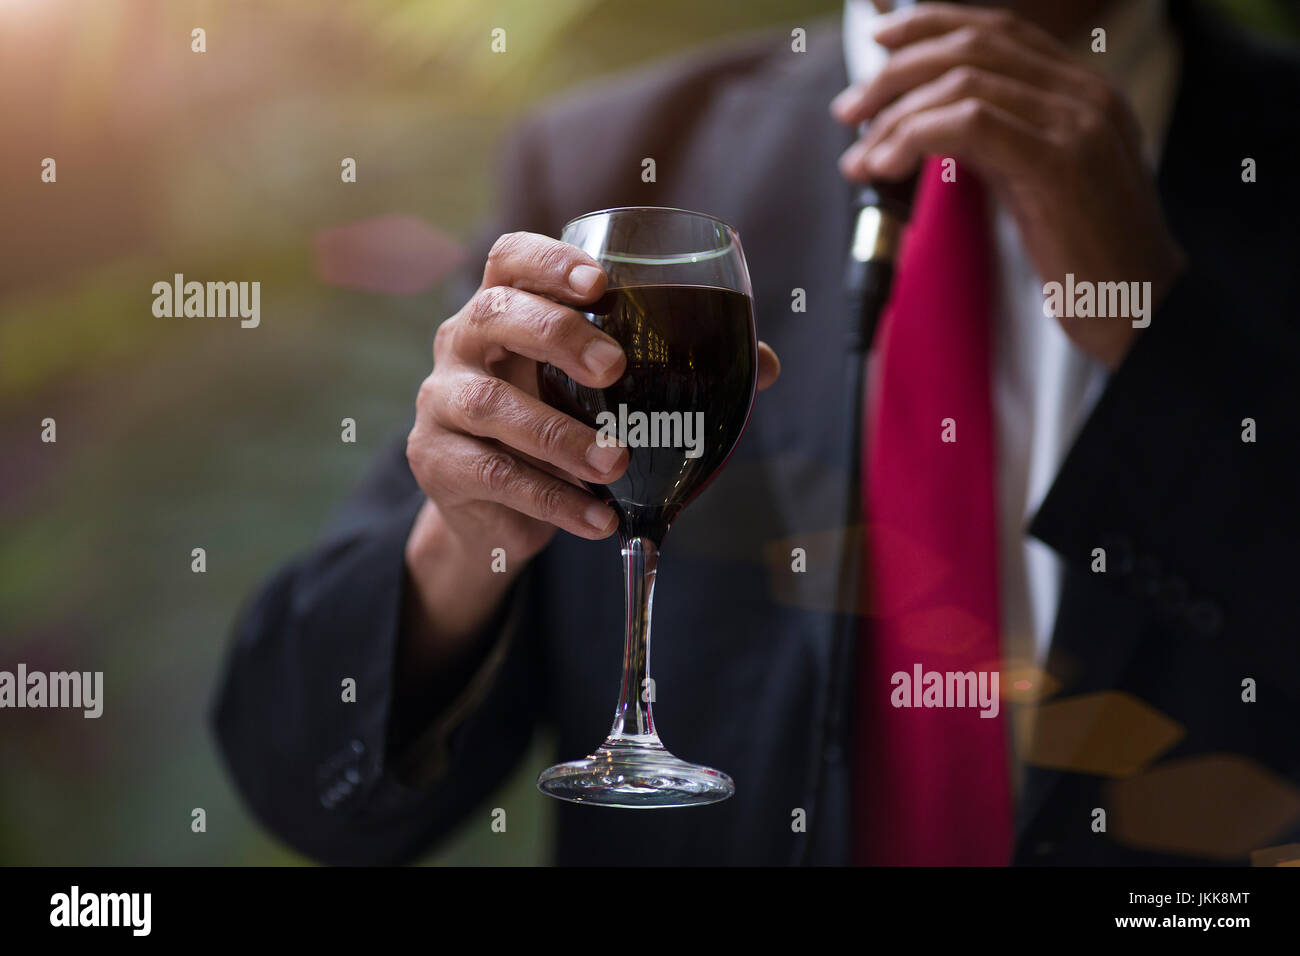 Close-up shooting of man's hand holding a glass of wine Stock Photo